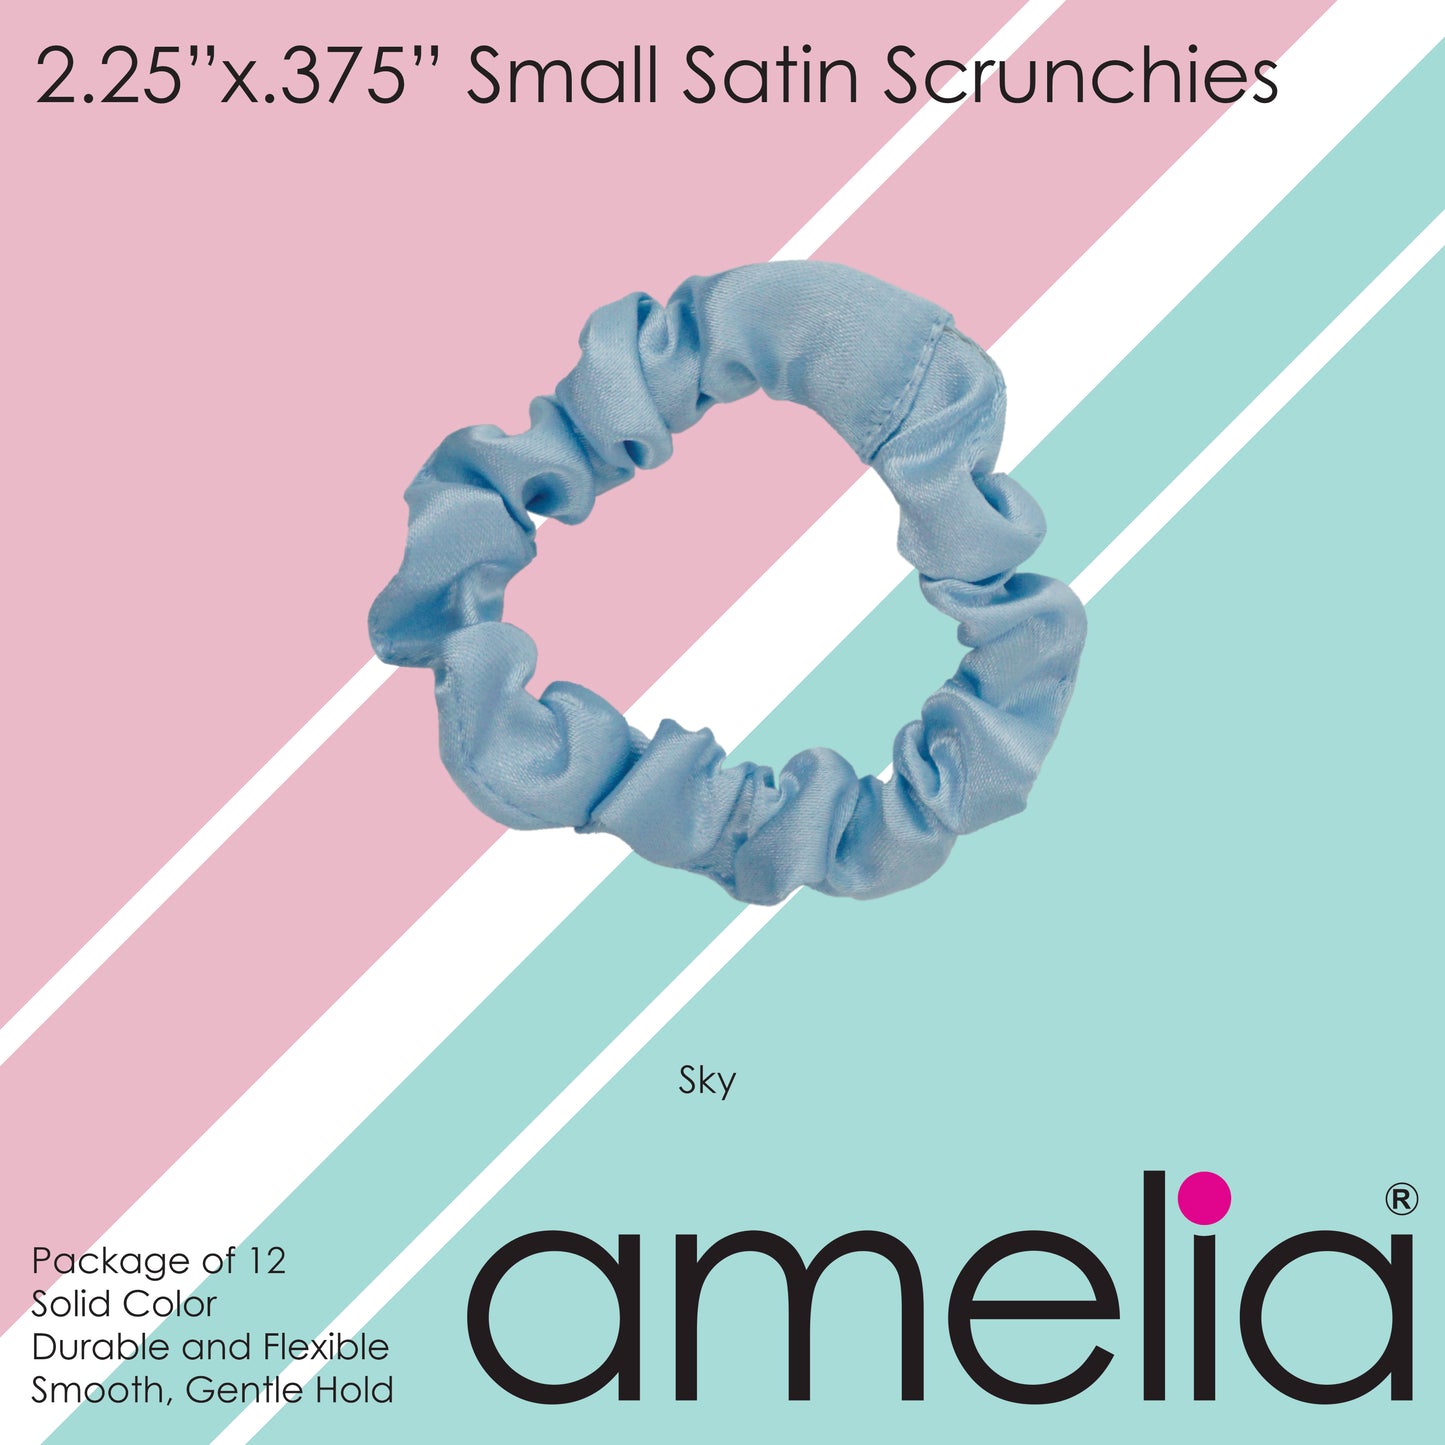 Amelia Beauty, Sky Satin Scrunchies, 2.25in Diameter, Gentle on Hair, Strong Hold, No Snag, No Dents or Creases. 12 Pack